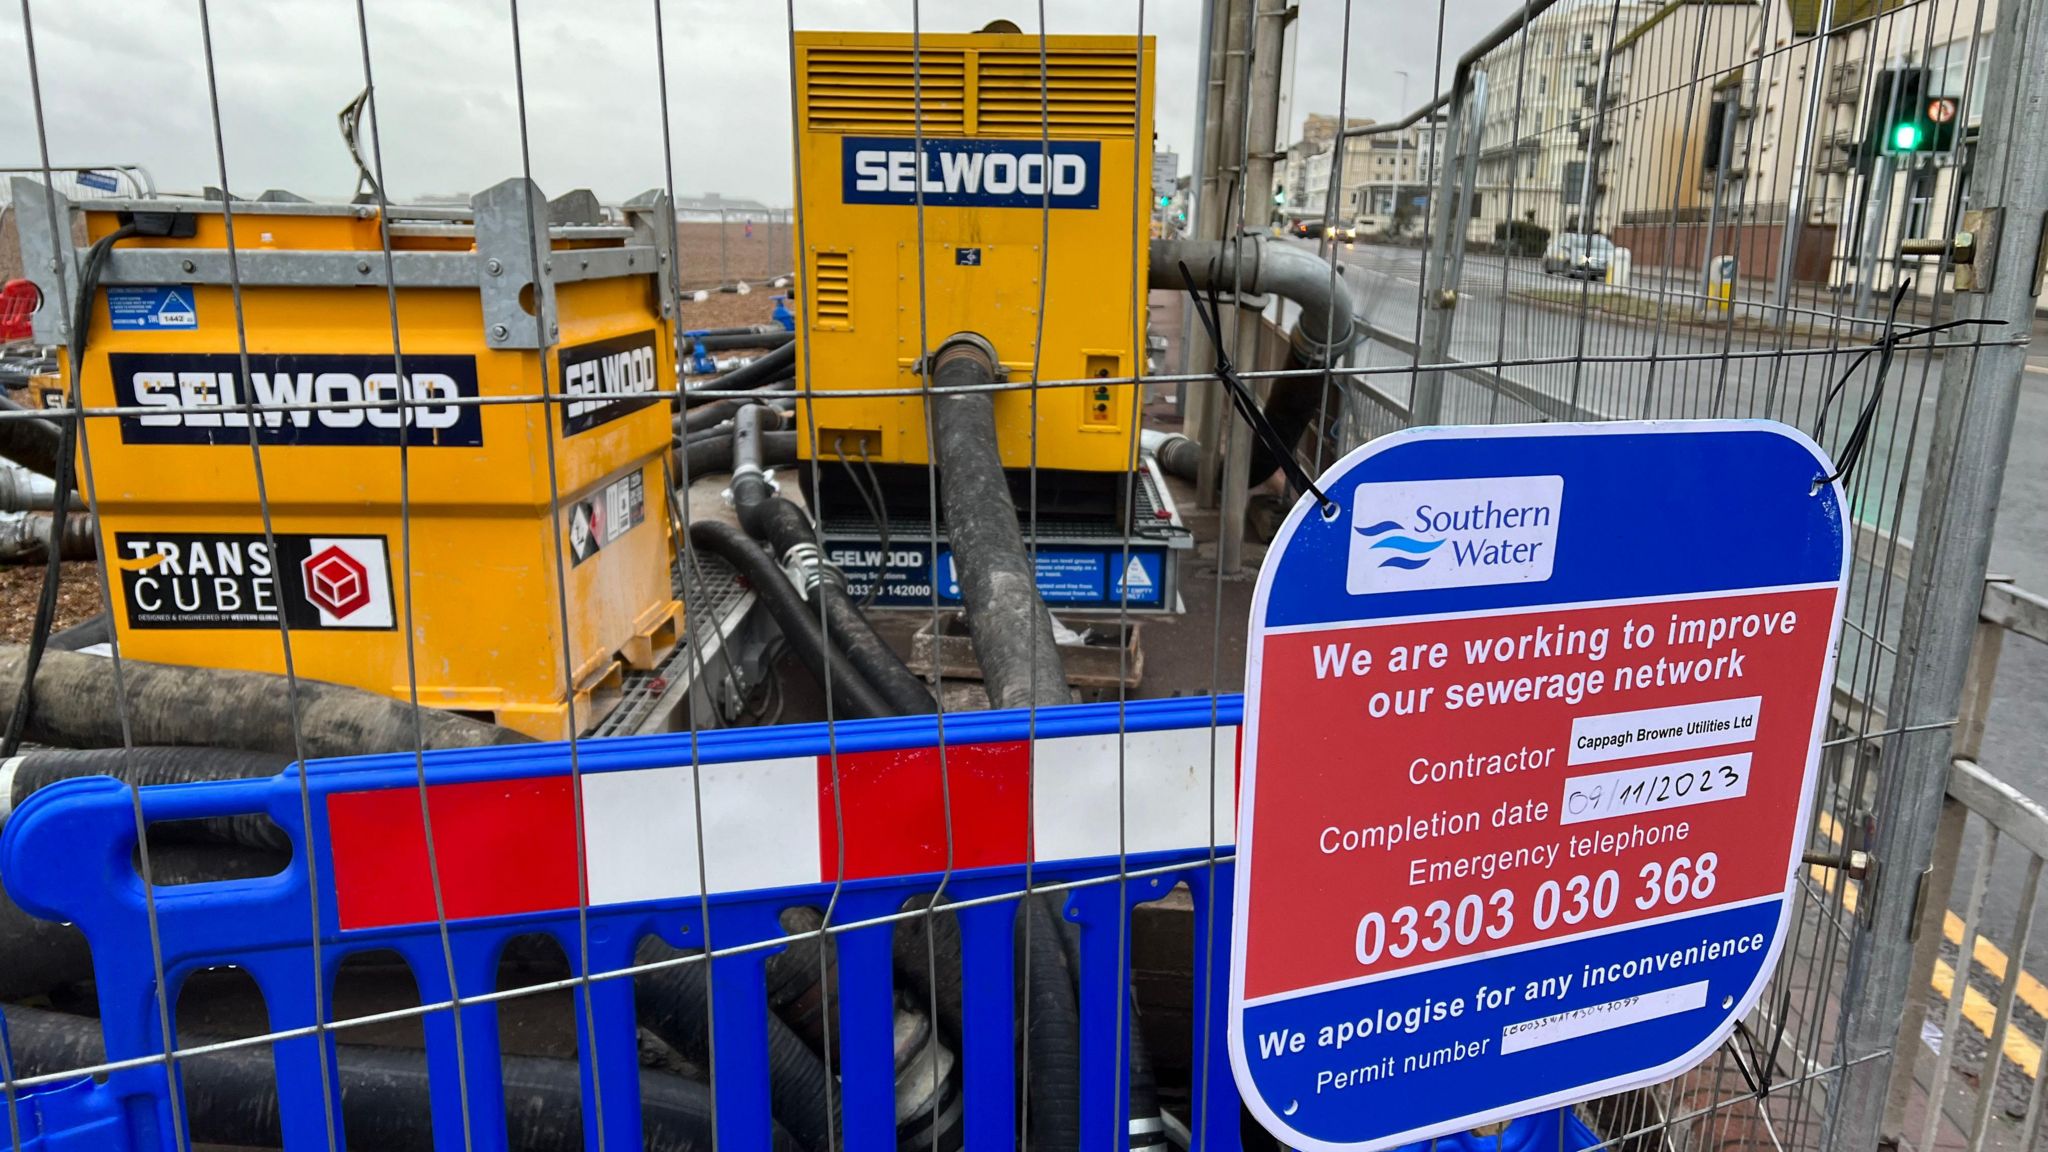 A Southern Water sign in front of a large yellow pump behind railings